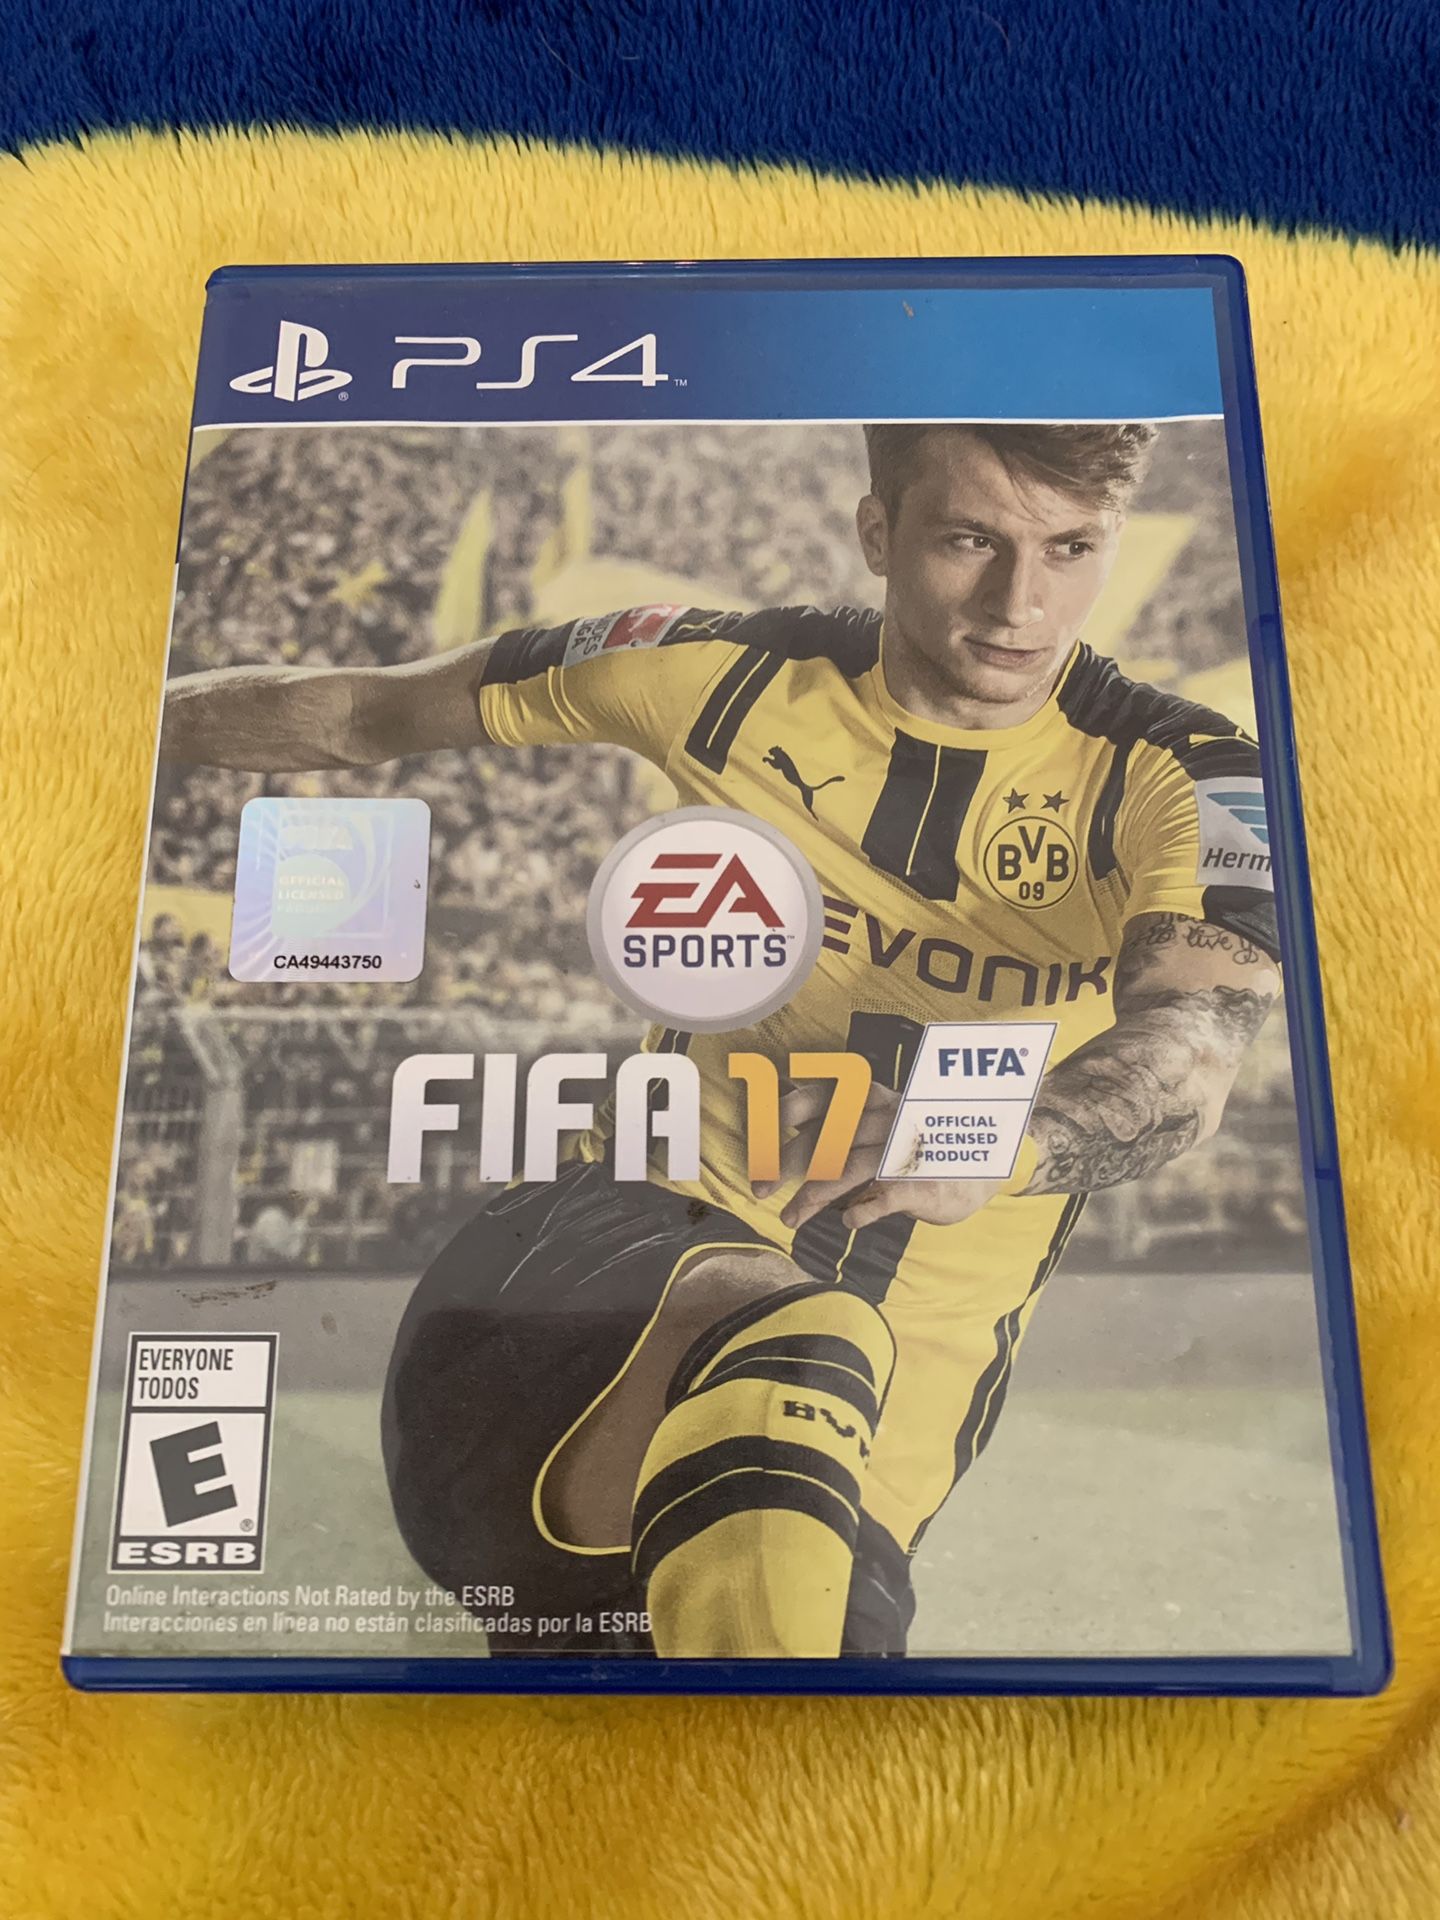 Fifa 17 for ps4. Barely played with. Great condition